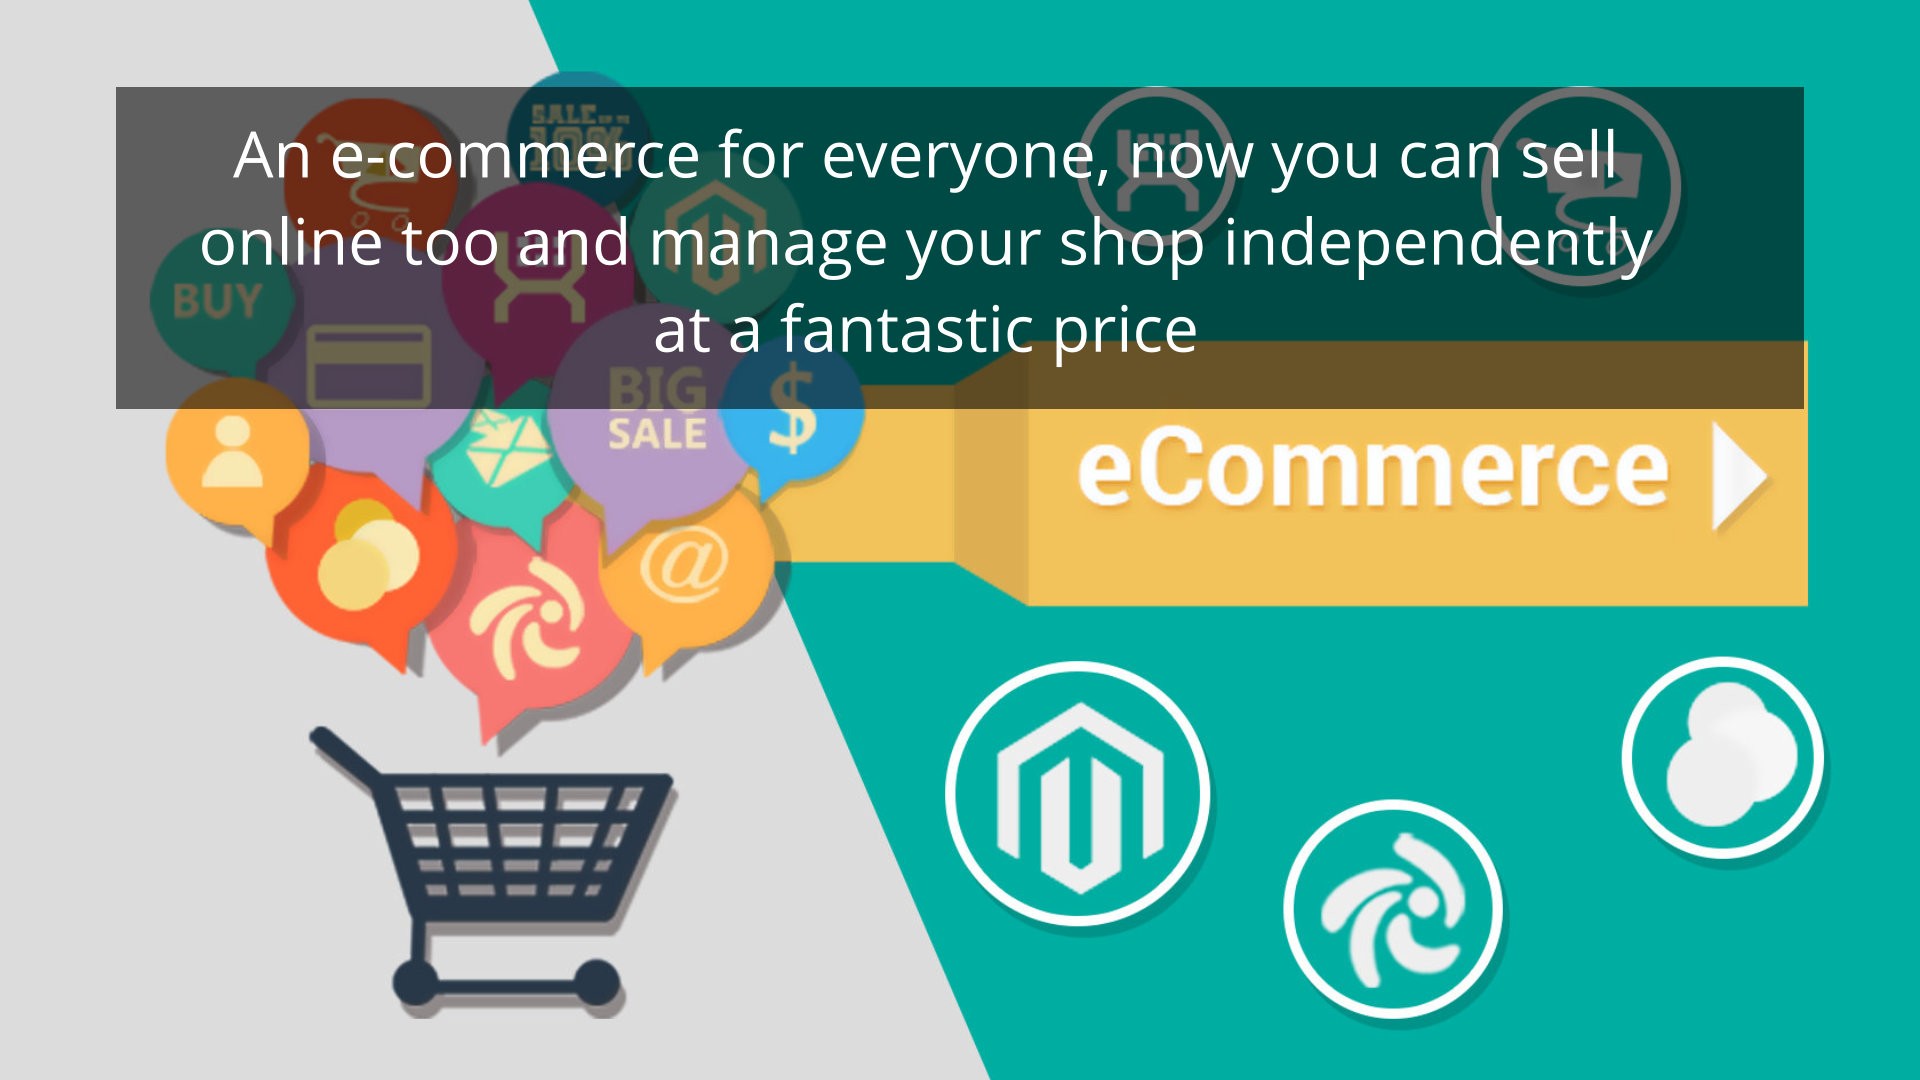  eCommerce for Businesses and Smart Enterprises ready for the digital market